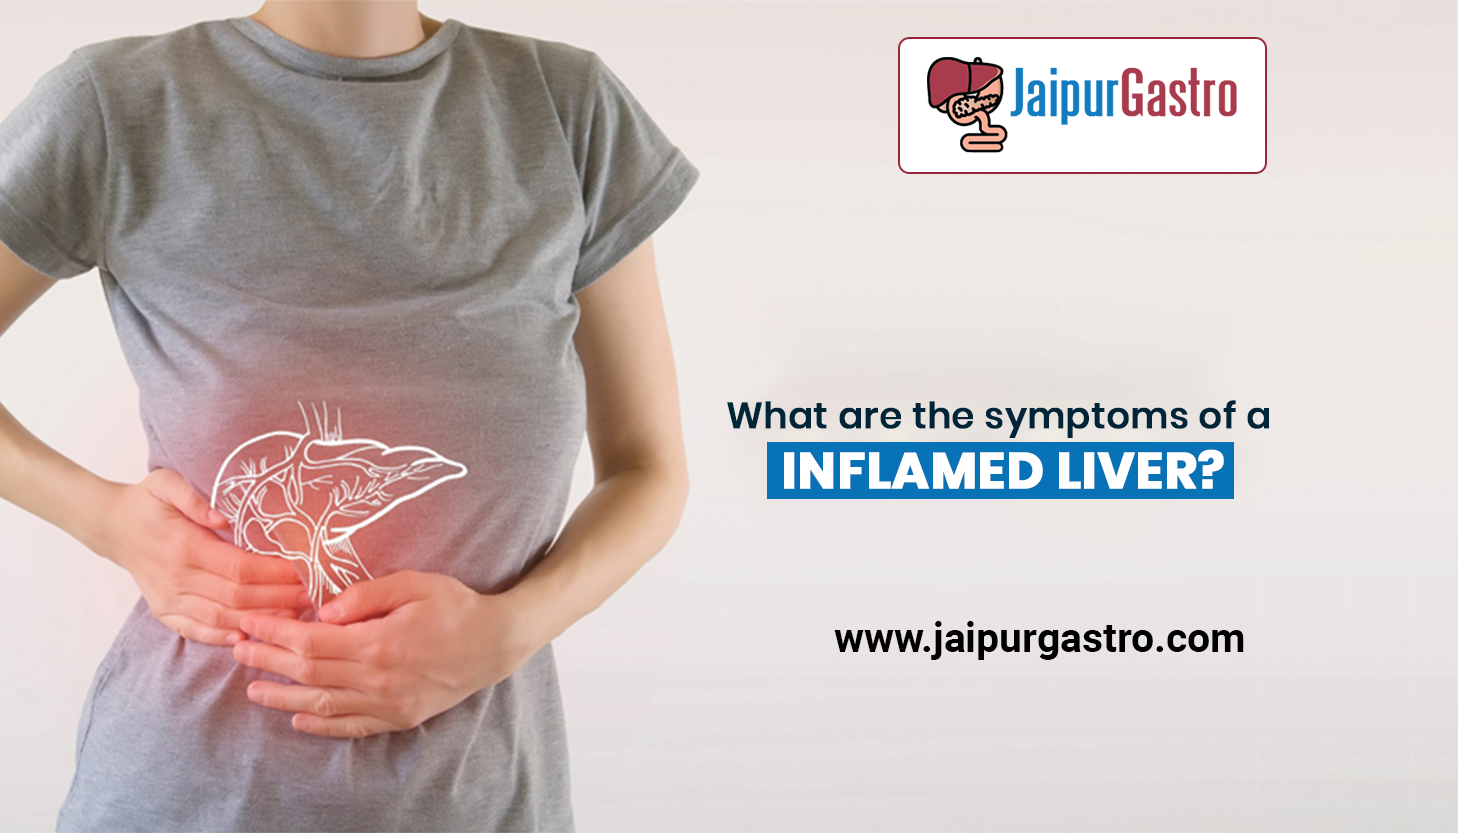 Symptoms of an Inflamed Liver